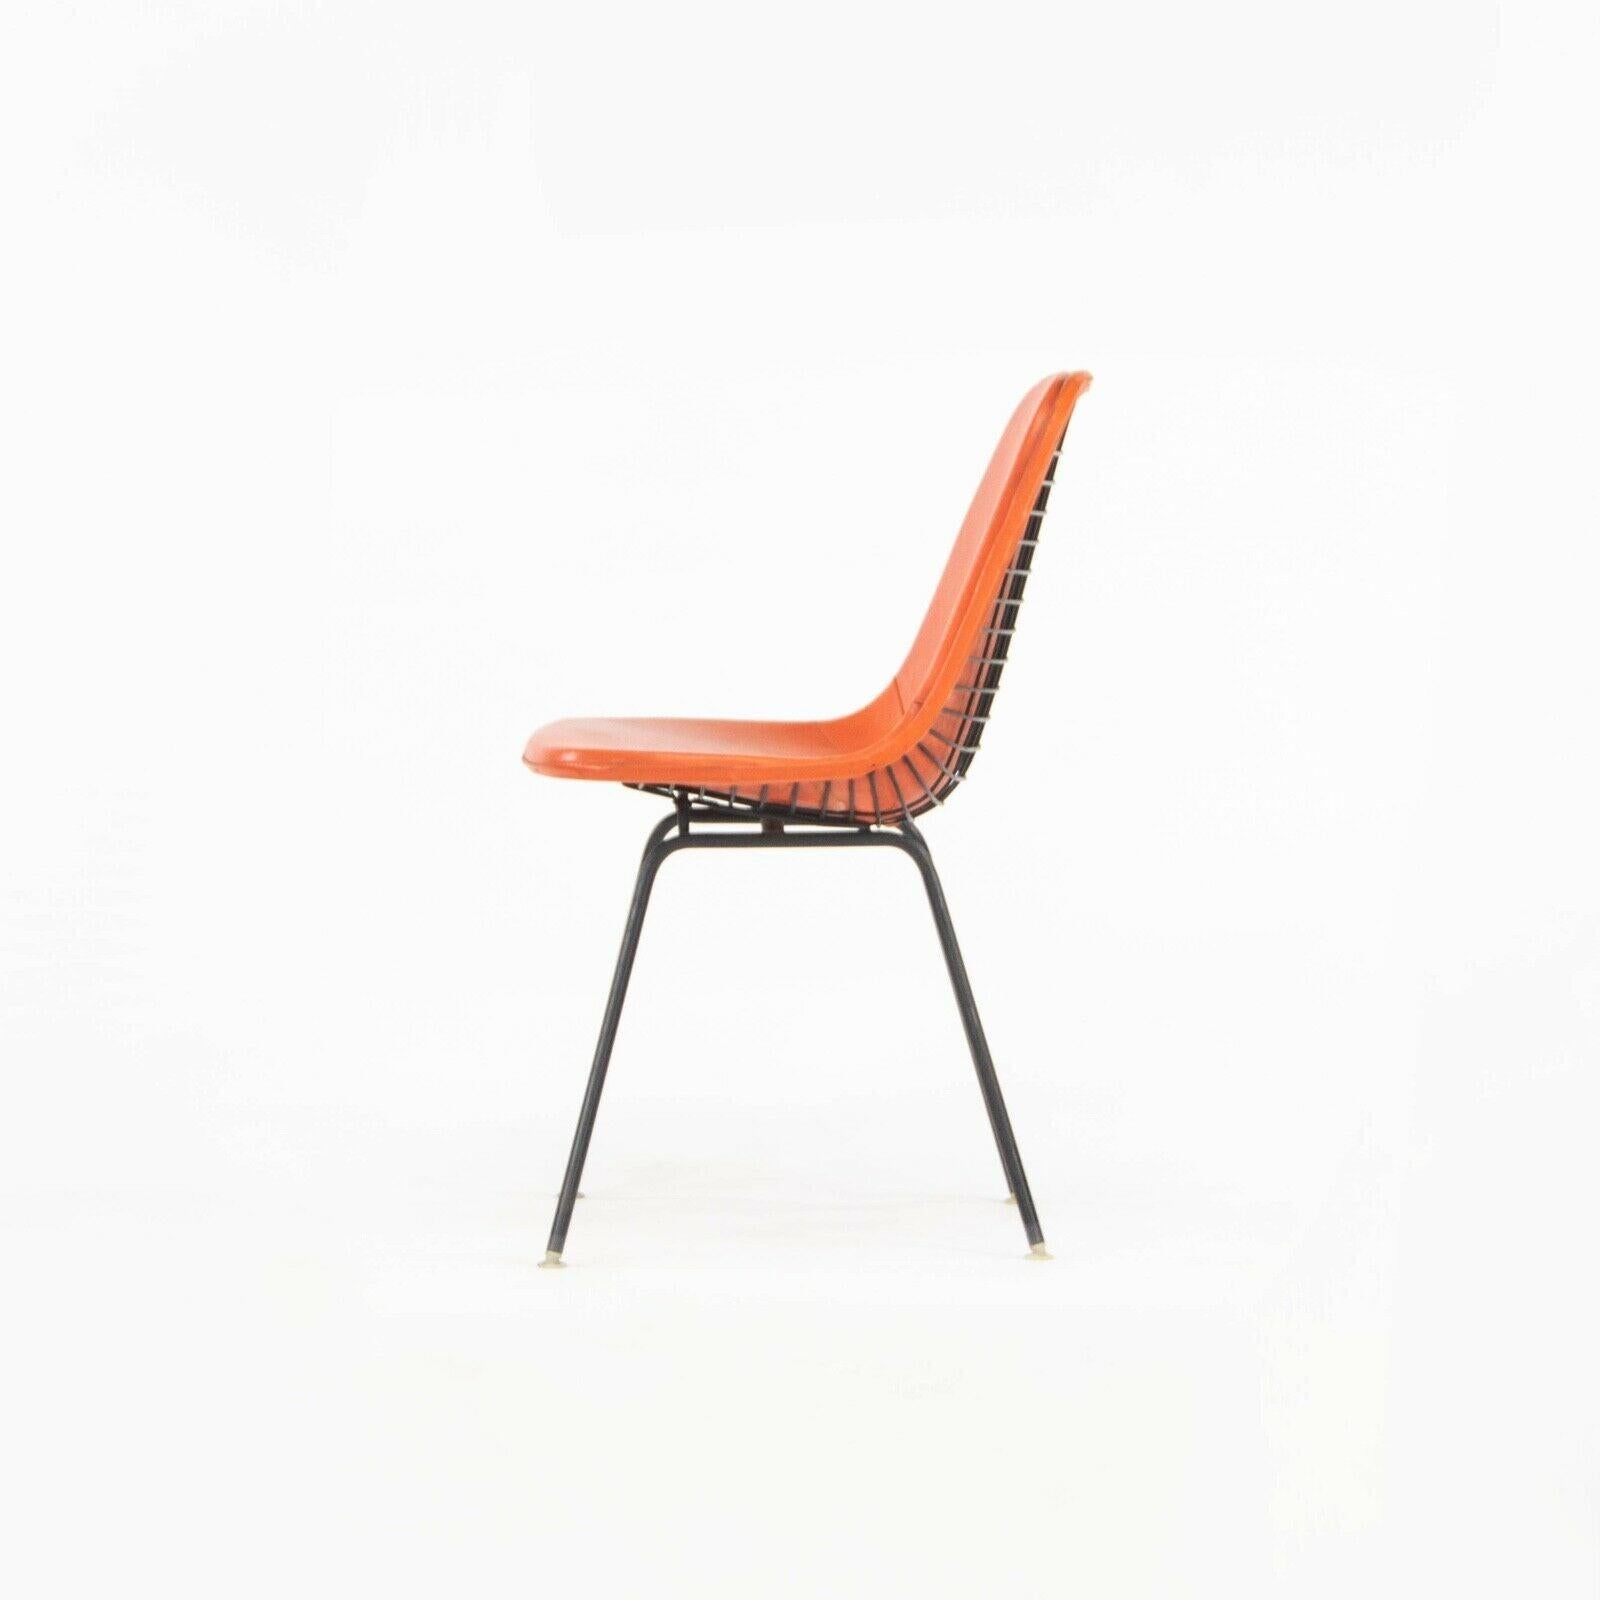 Aluminum 1957 Herman Miller Eames DKX Wire Dining Chair with Full Naugahyde Orange Pad For Sale